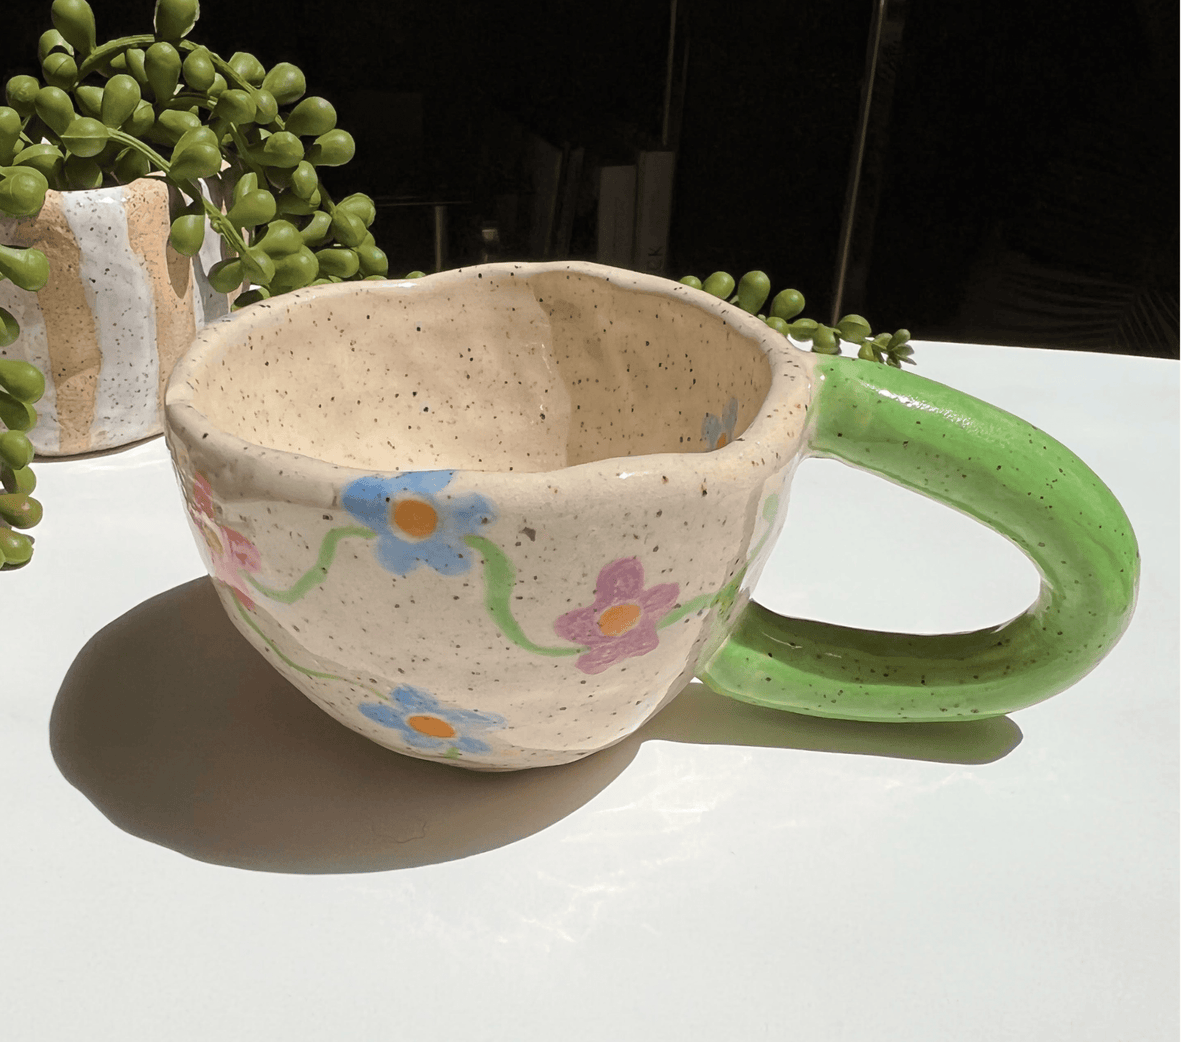 Coffee Tasting and Clay Mug Making Pottery Class — 4/21 + 5/18 (Time Out Market Boston)